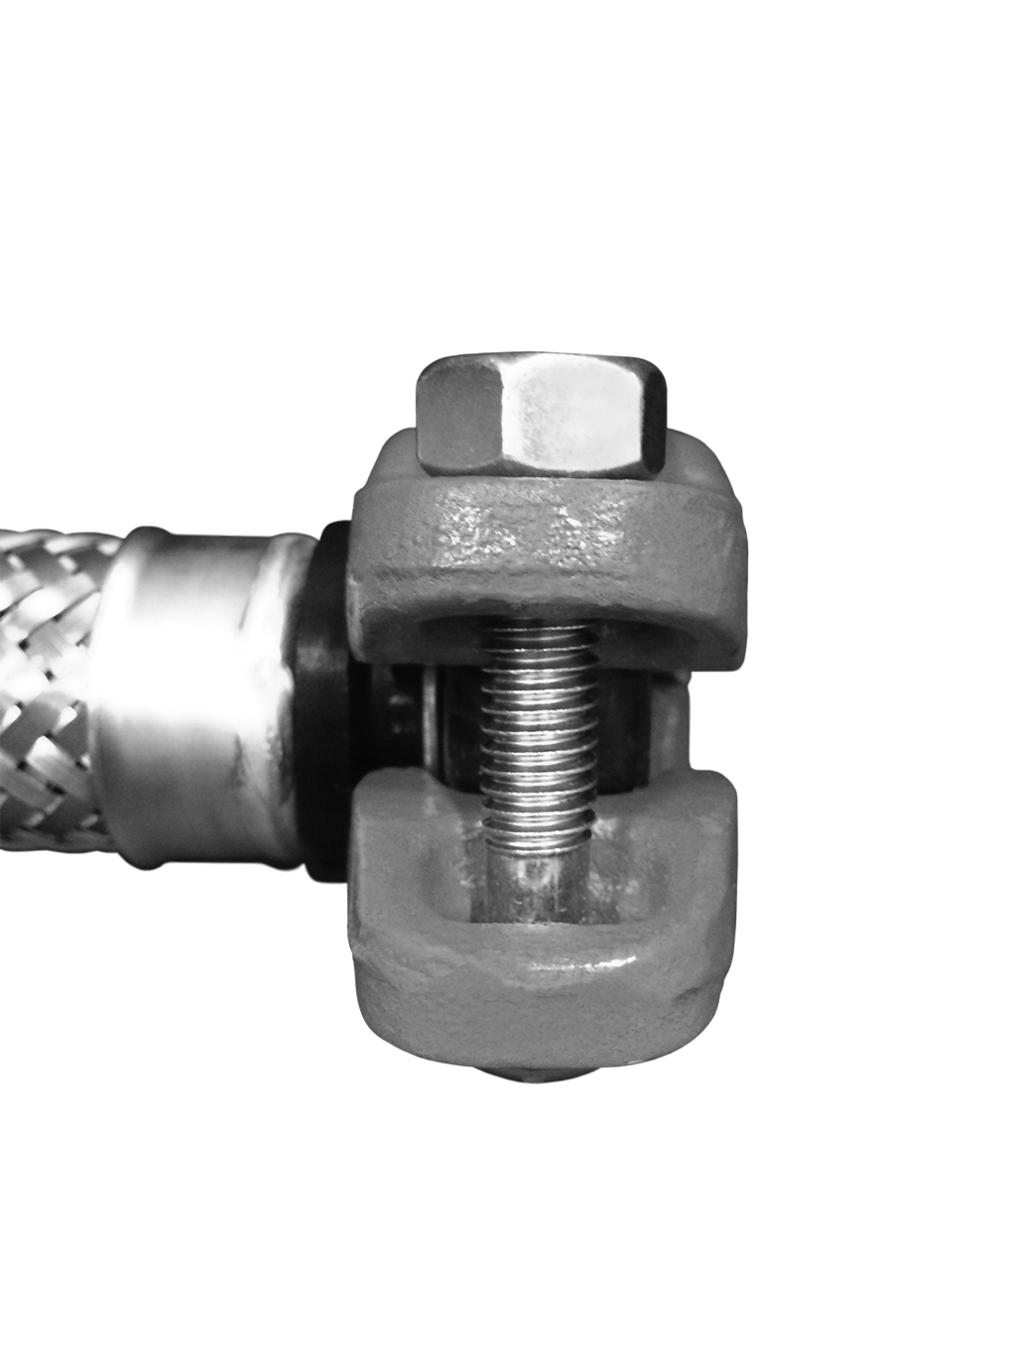 1-INCH/DN25 IGS CONNECTION TO THE SPRINKLER PIPING USING A SERIES AH1-CC OR SERIES AH2-CC FLEXIBLE HOSE CORRECT - IGS Groove Profile INCORRECT - Orignal Groove System (OGS) Groove Profile The Style